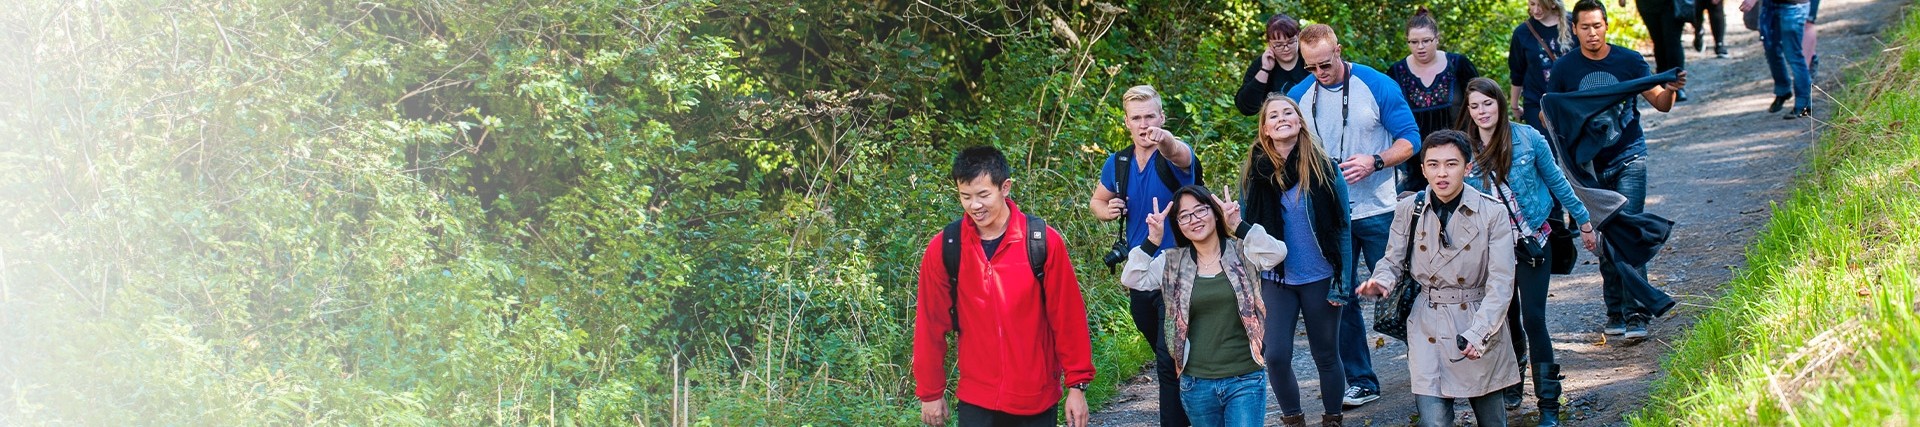 Group of students on an outdoor walk